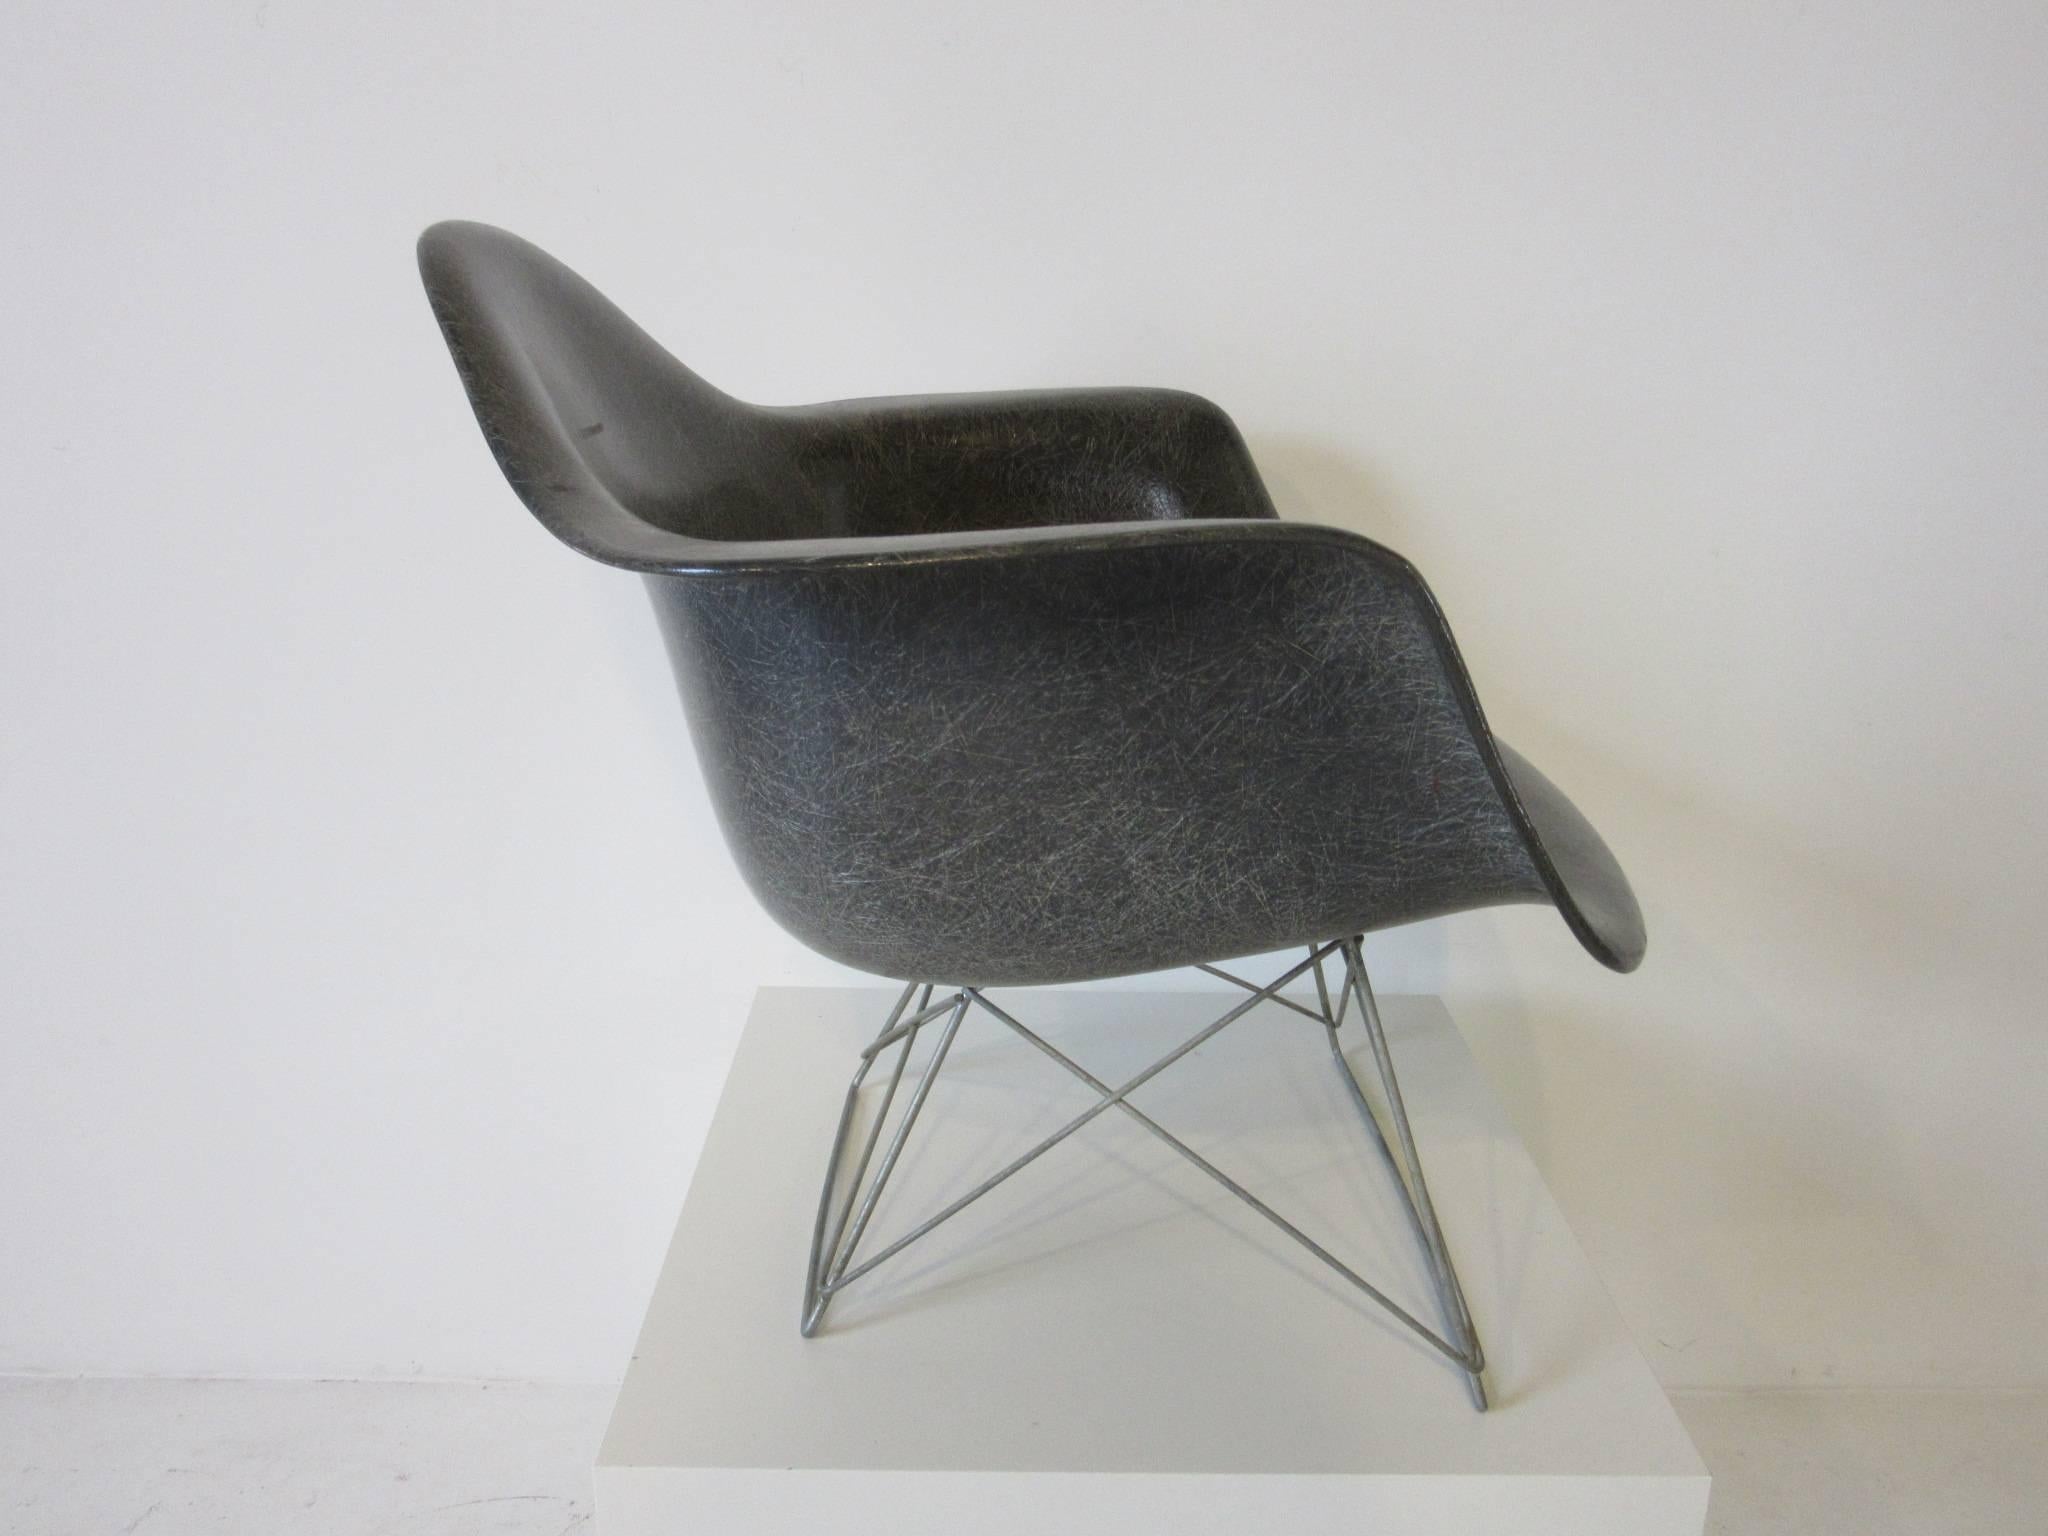 A very early Eames elephant gray fiberglass arm shell chair with the low zinc Banner metals wire base and rare rope edge. Retains the manufacturers label Zenith Plastics Company and Herman Miller designed by Charles Eames with ink pen mark ( 959 DKR